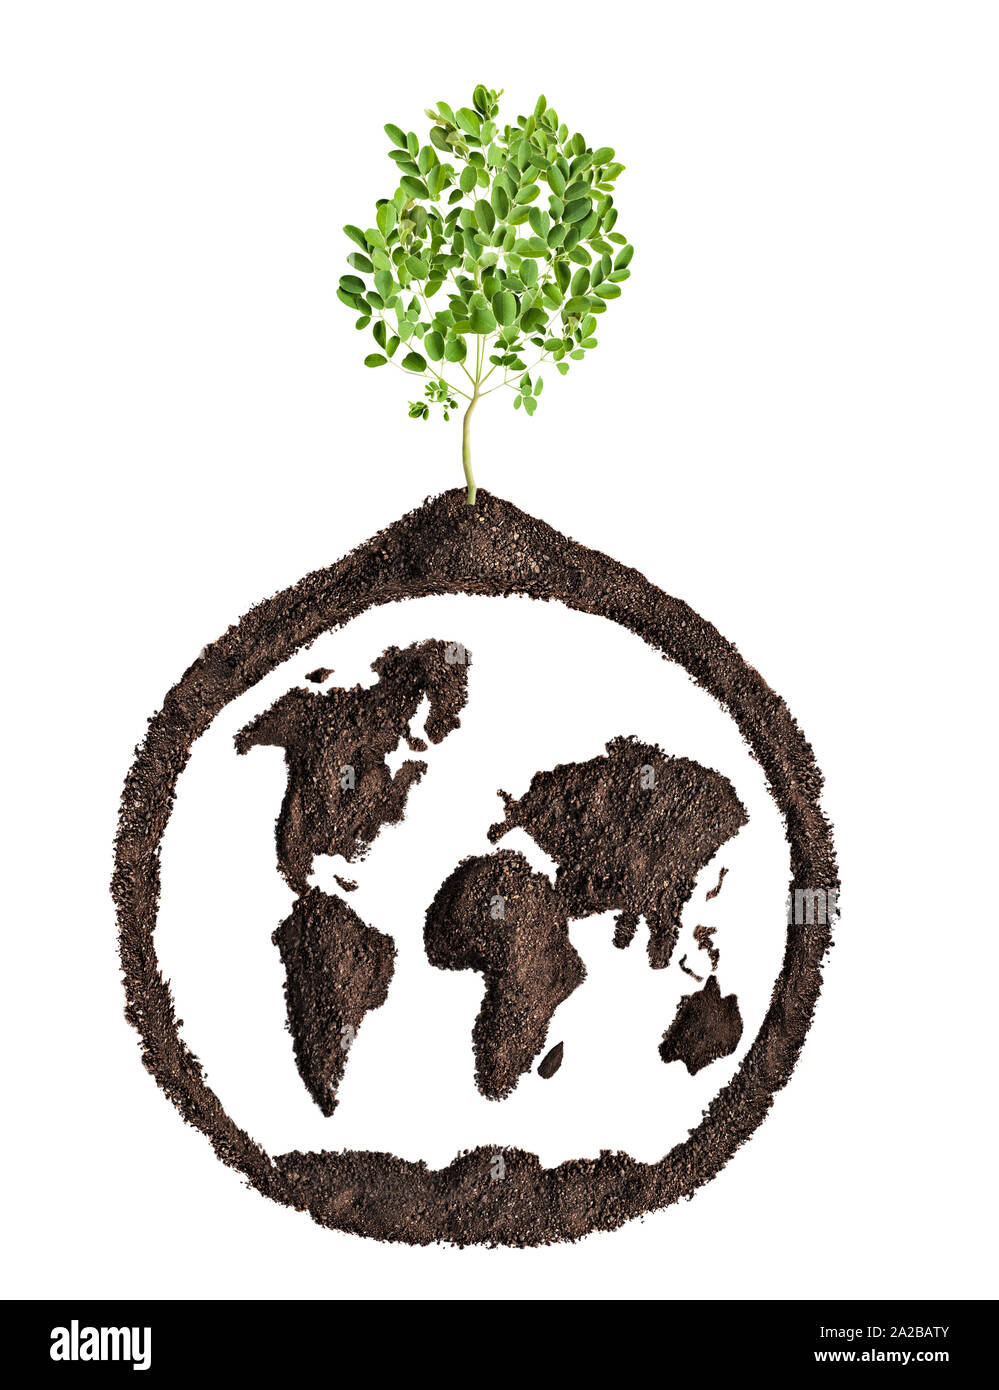 conceptual world map recycling or agriculture, growing a tree Stock Photo